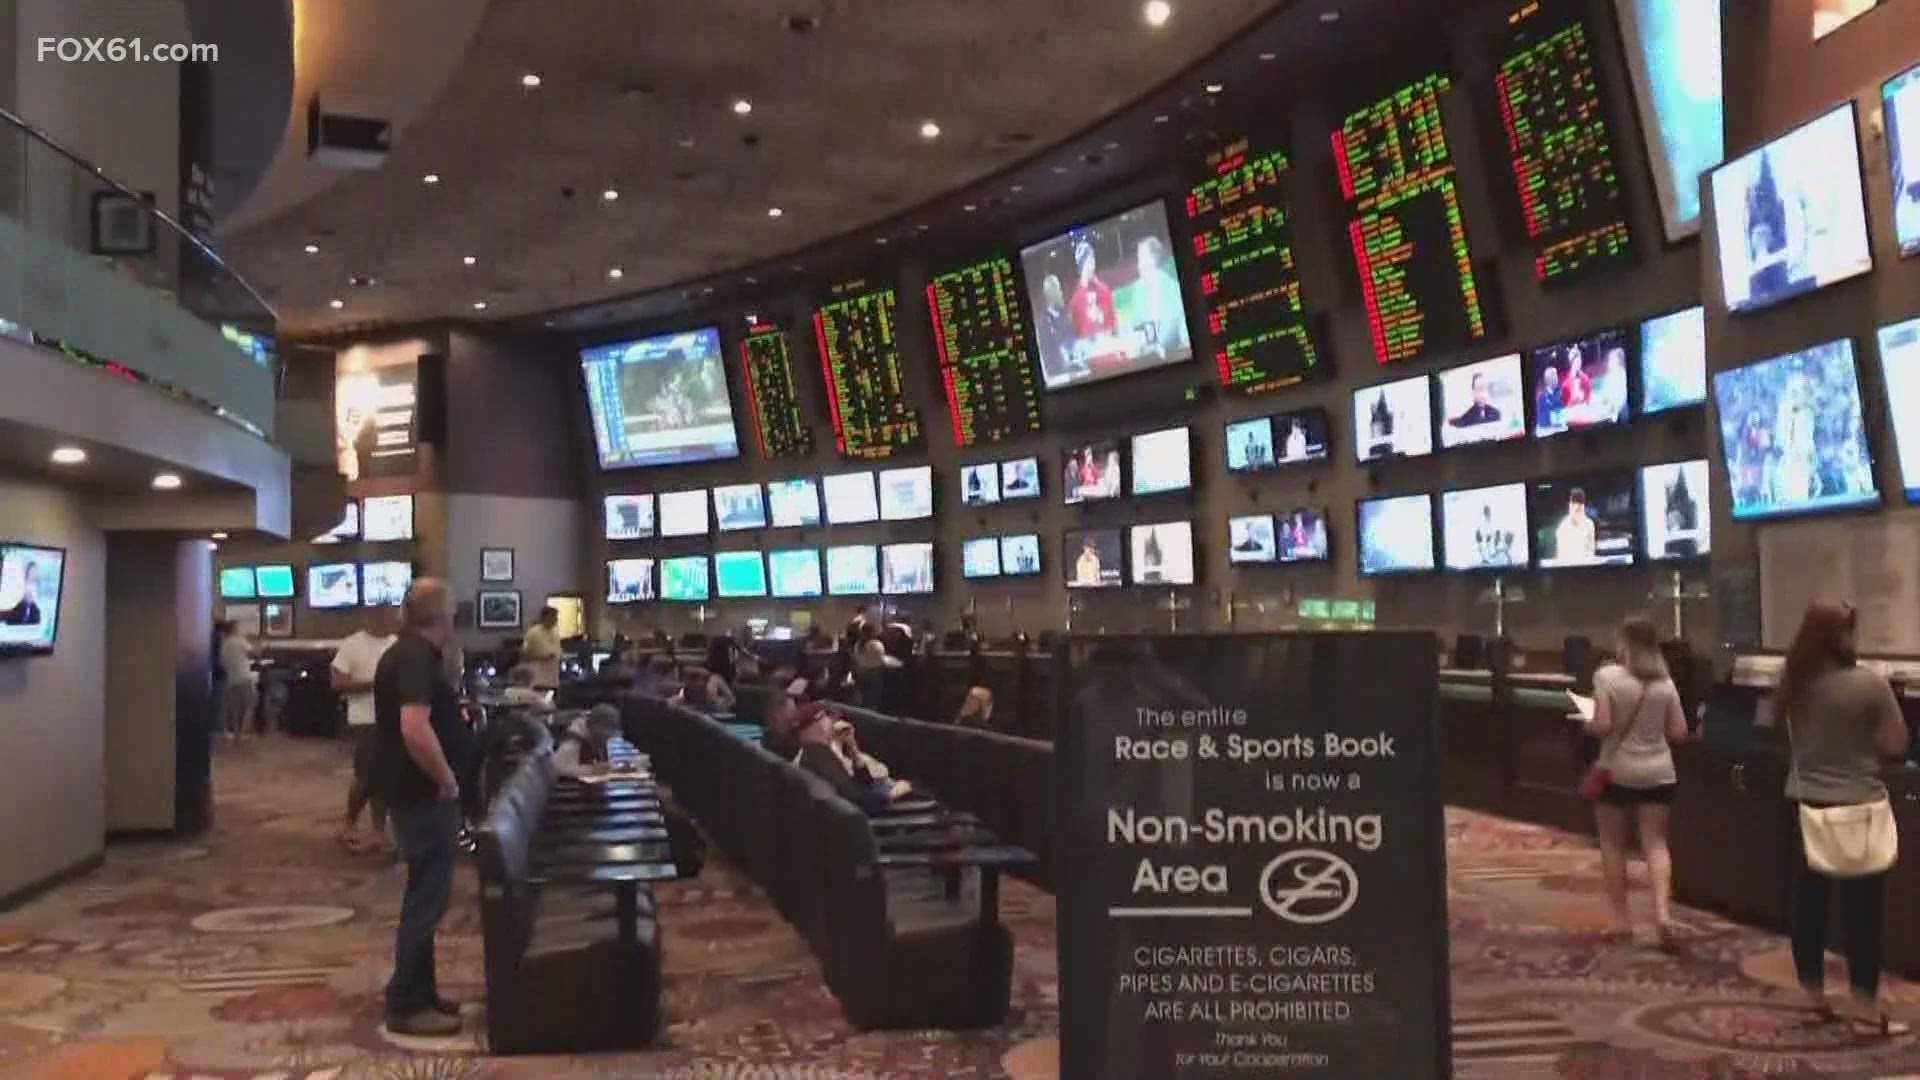 The bill allows Lamont to amend the state’s compacts with the tribes and allow both to offer sports betting, online gambling and online fantasy sports.